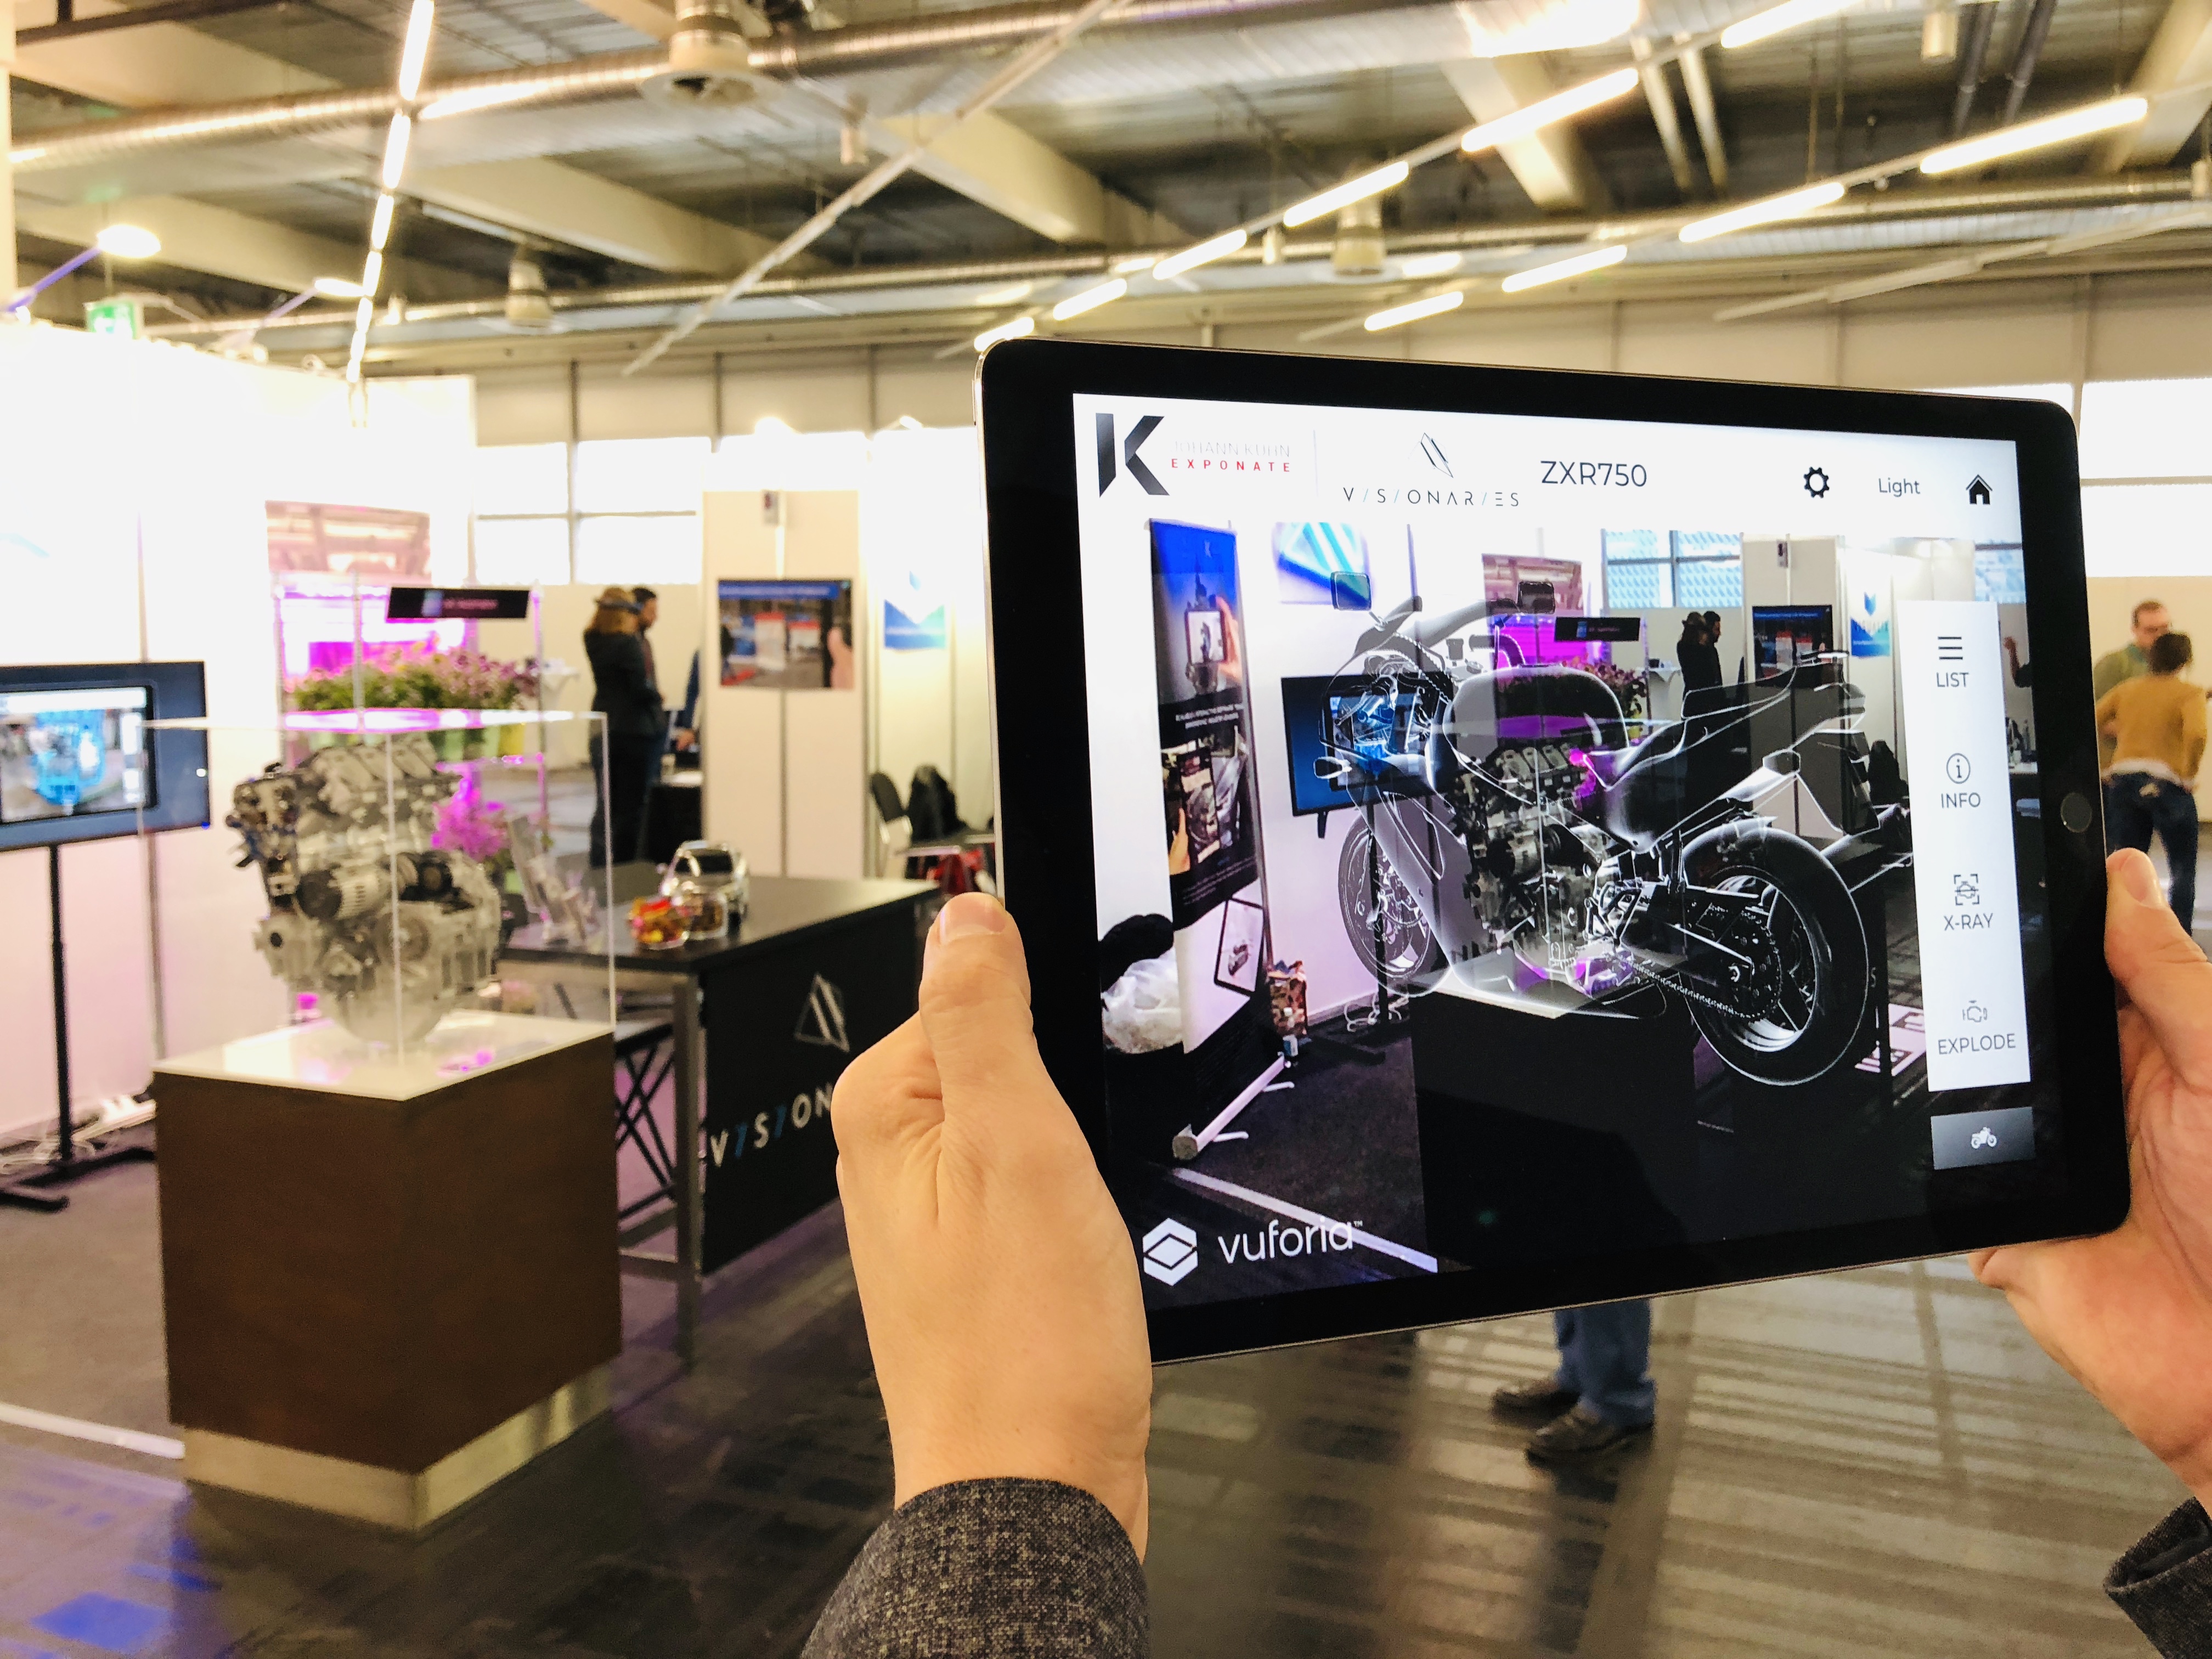 livebau, Visionaries 777 and Johann Kuhn present 3D exhibits in a completely new way by using AR